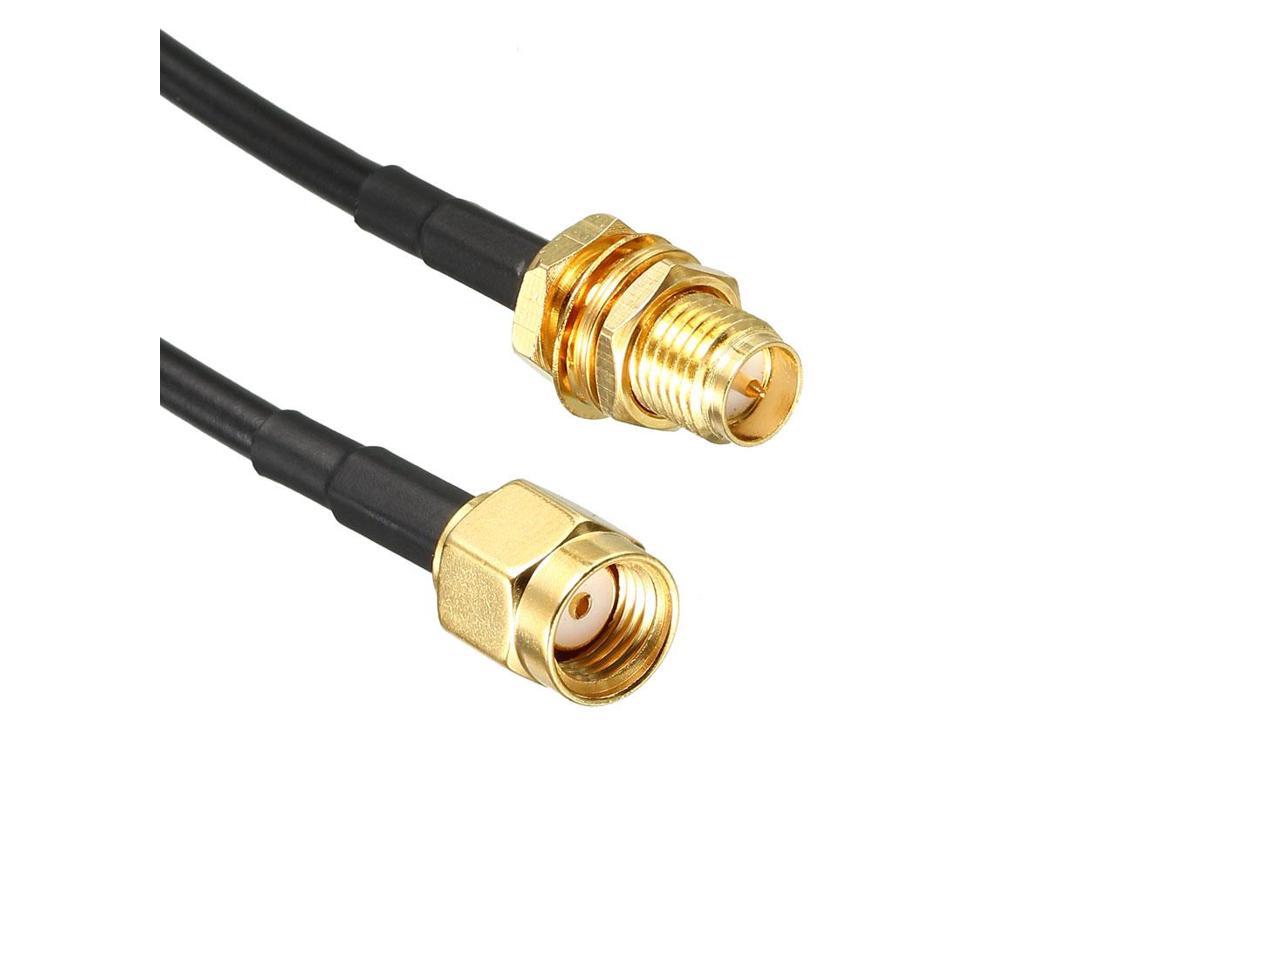 Antenna Extension Cable Rp Sma Male To Rp Sma Female Low Loss 33 Ft Rg174 2pcs Newegg Ca